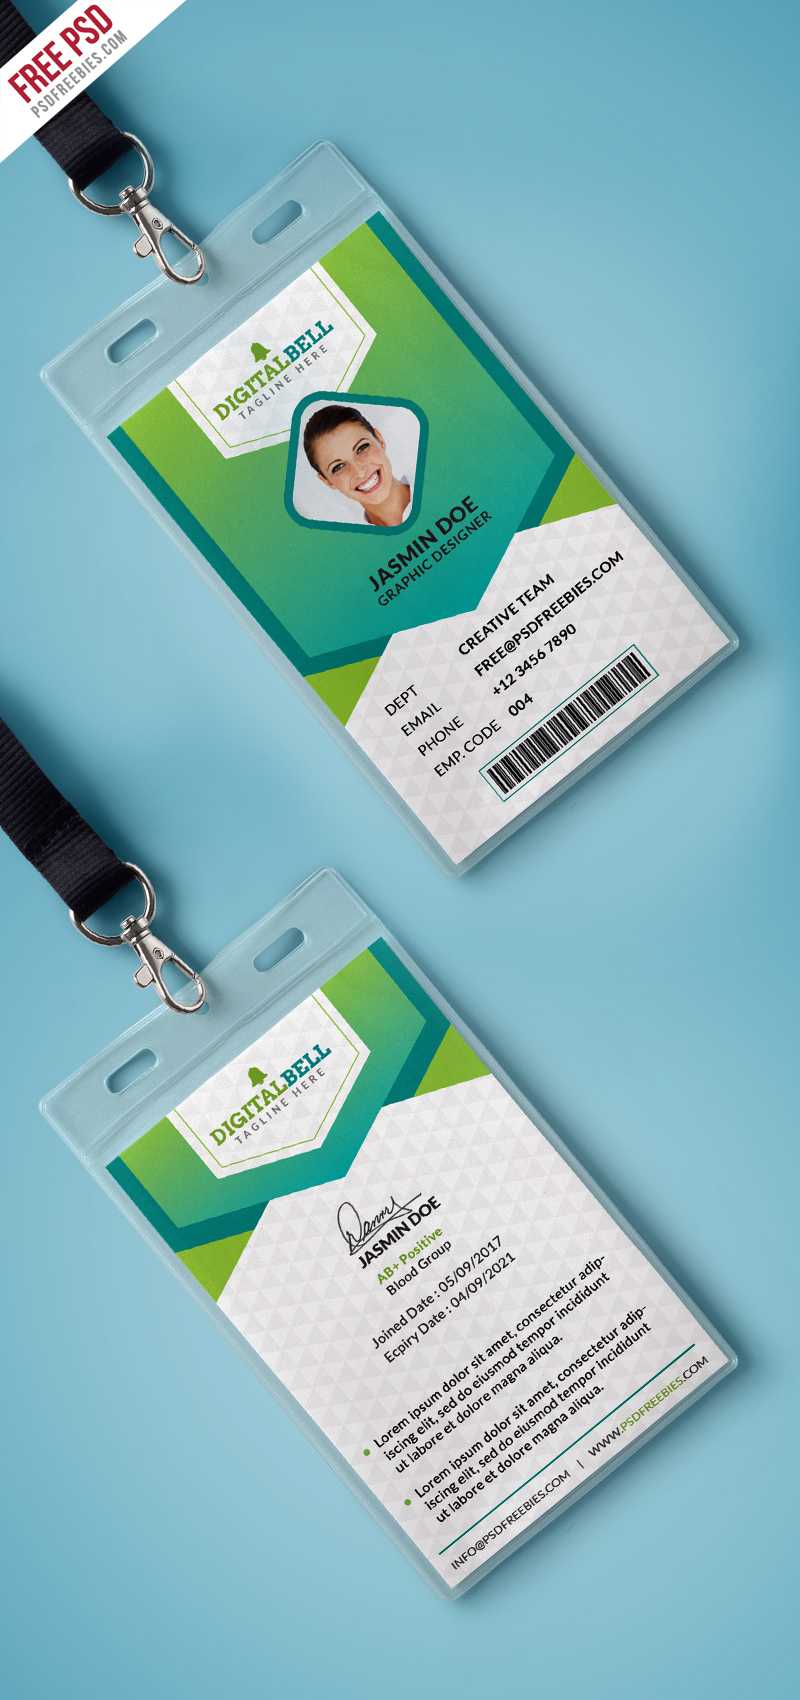 Multipurpose Photo Identity Card Template Psd | Psdfreebies With Regard To Id Card Design Template Psd Free Download